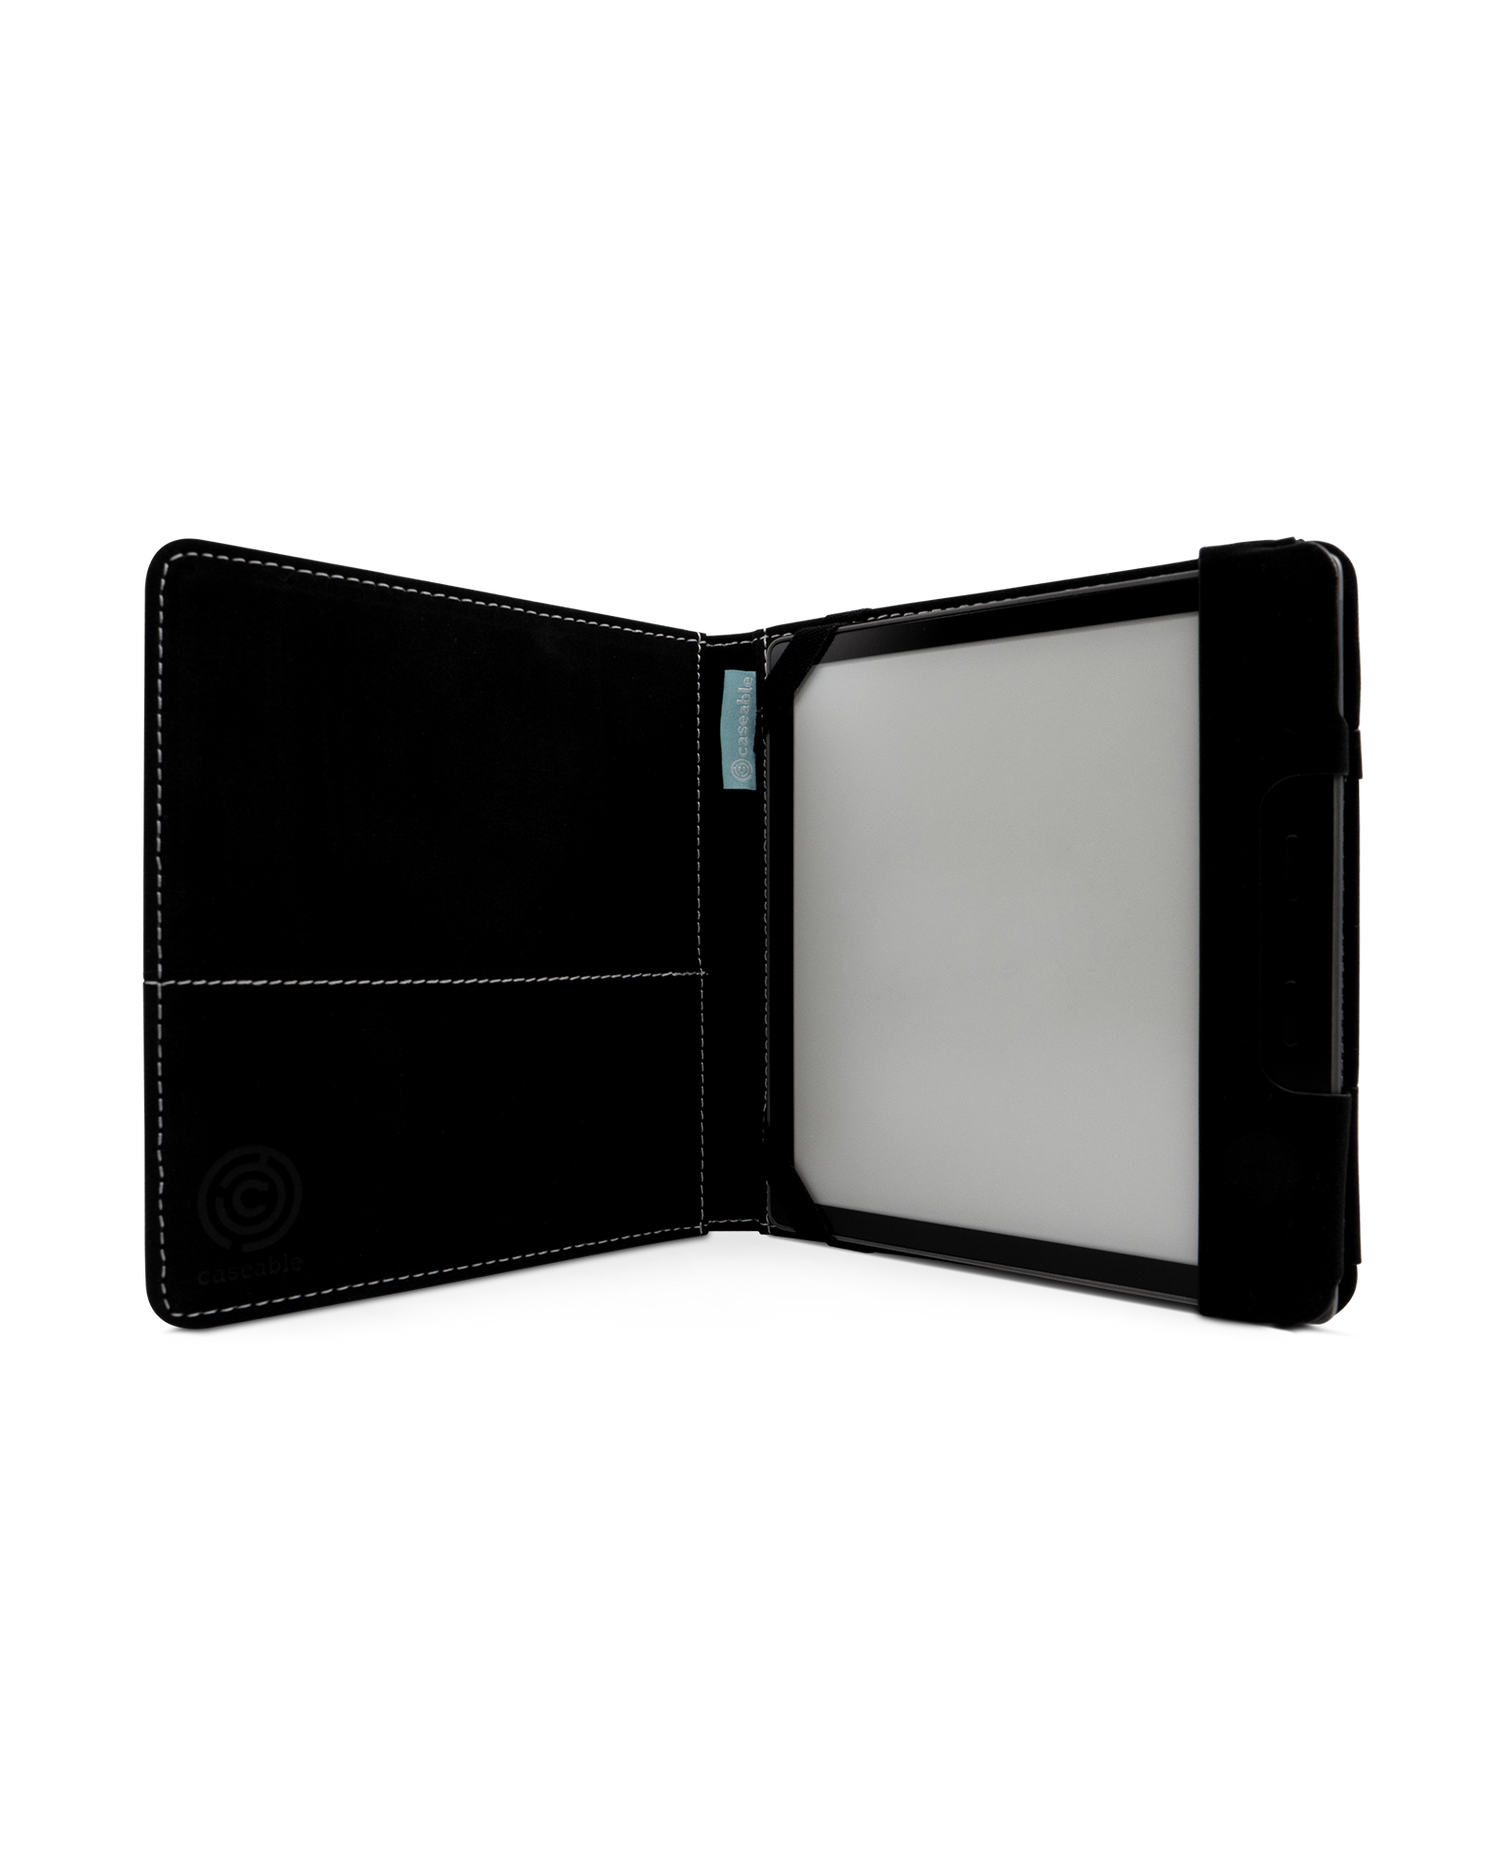 Grids eReader Case for tolino vision 6: Opened interior view